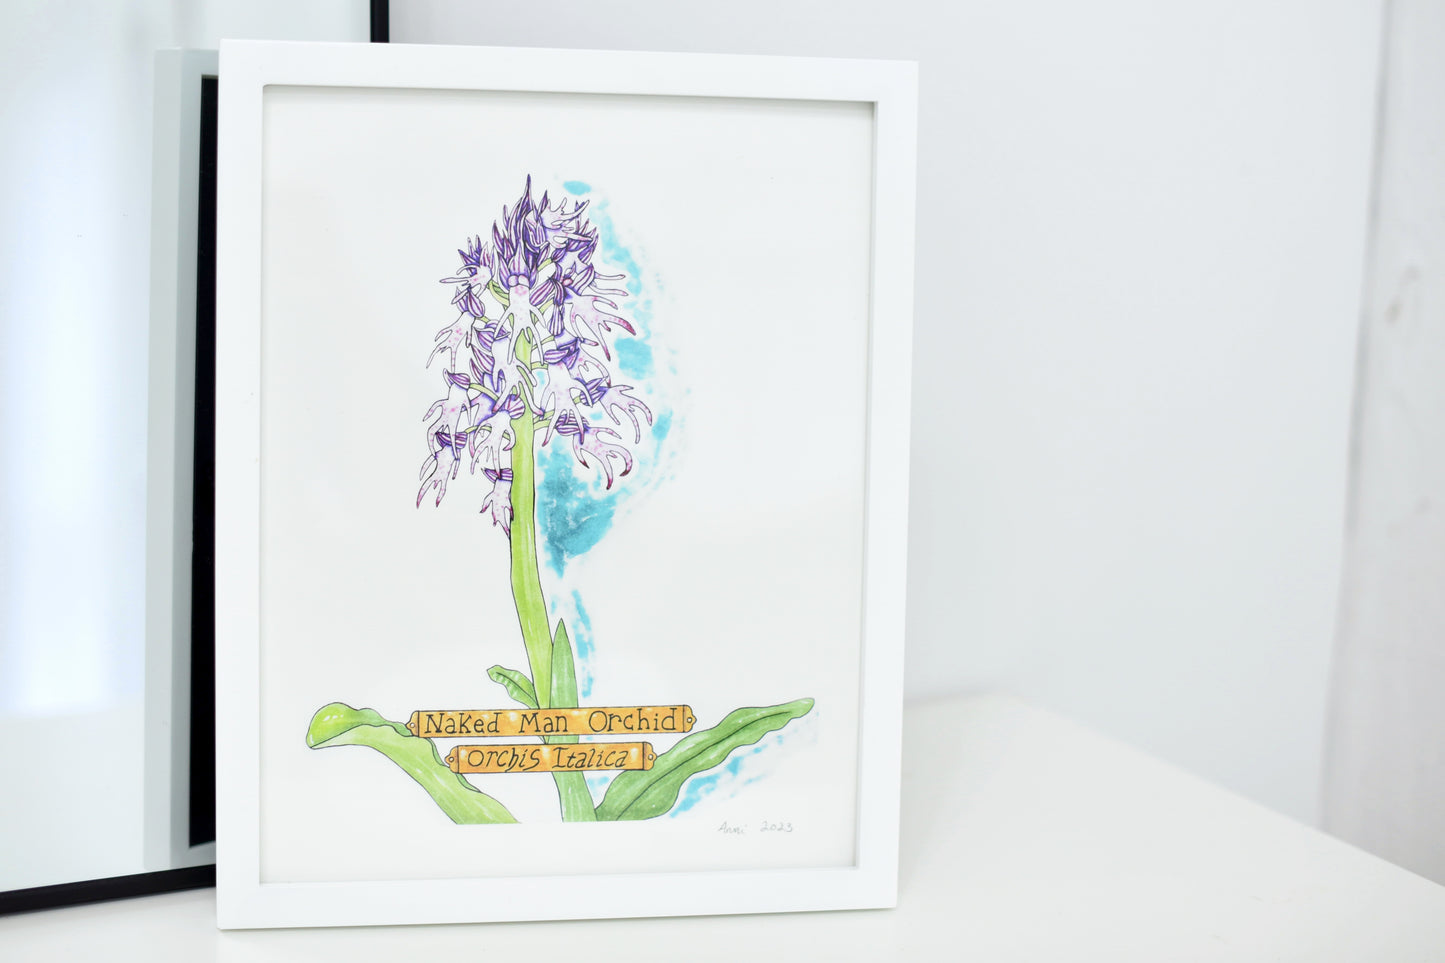 "Naked Man Orchid" - signed art print